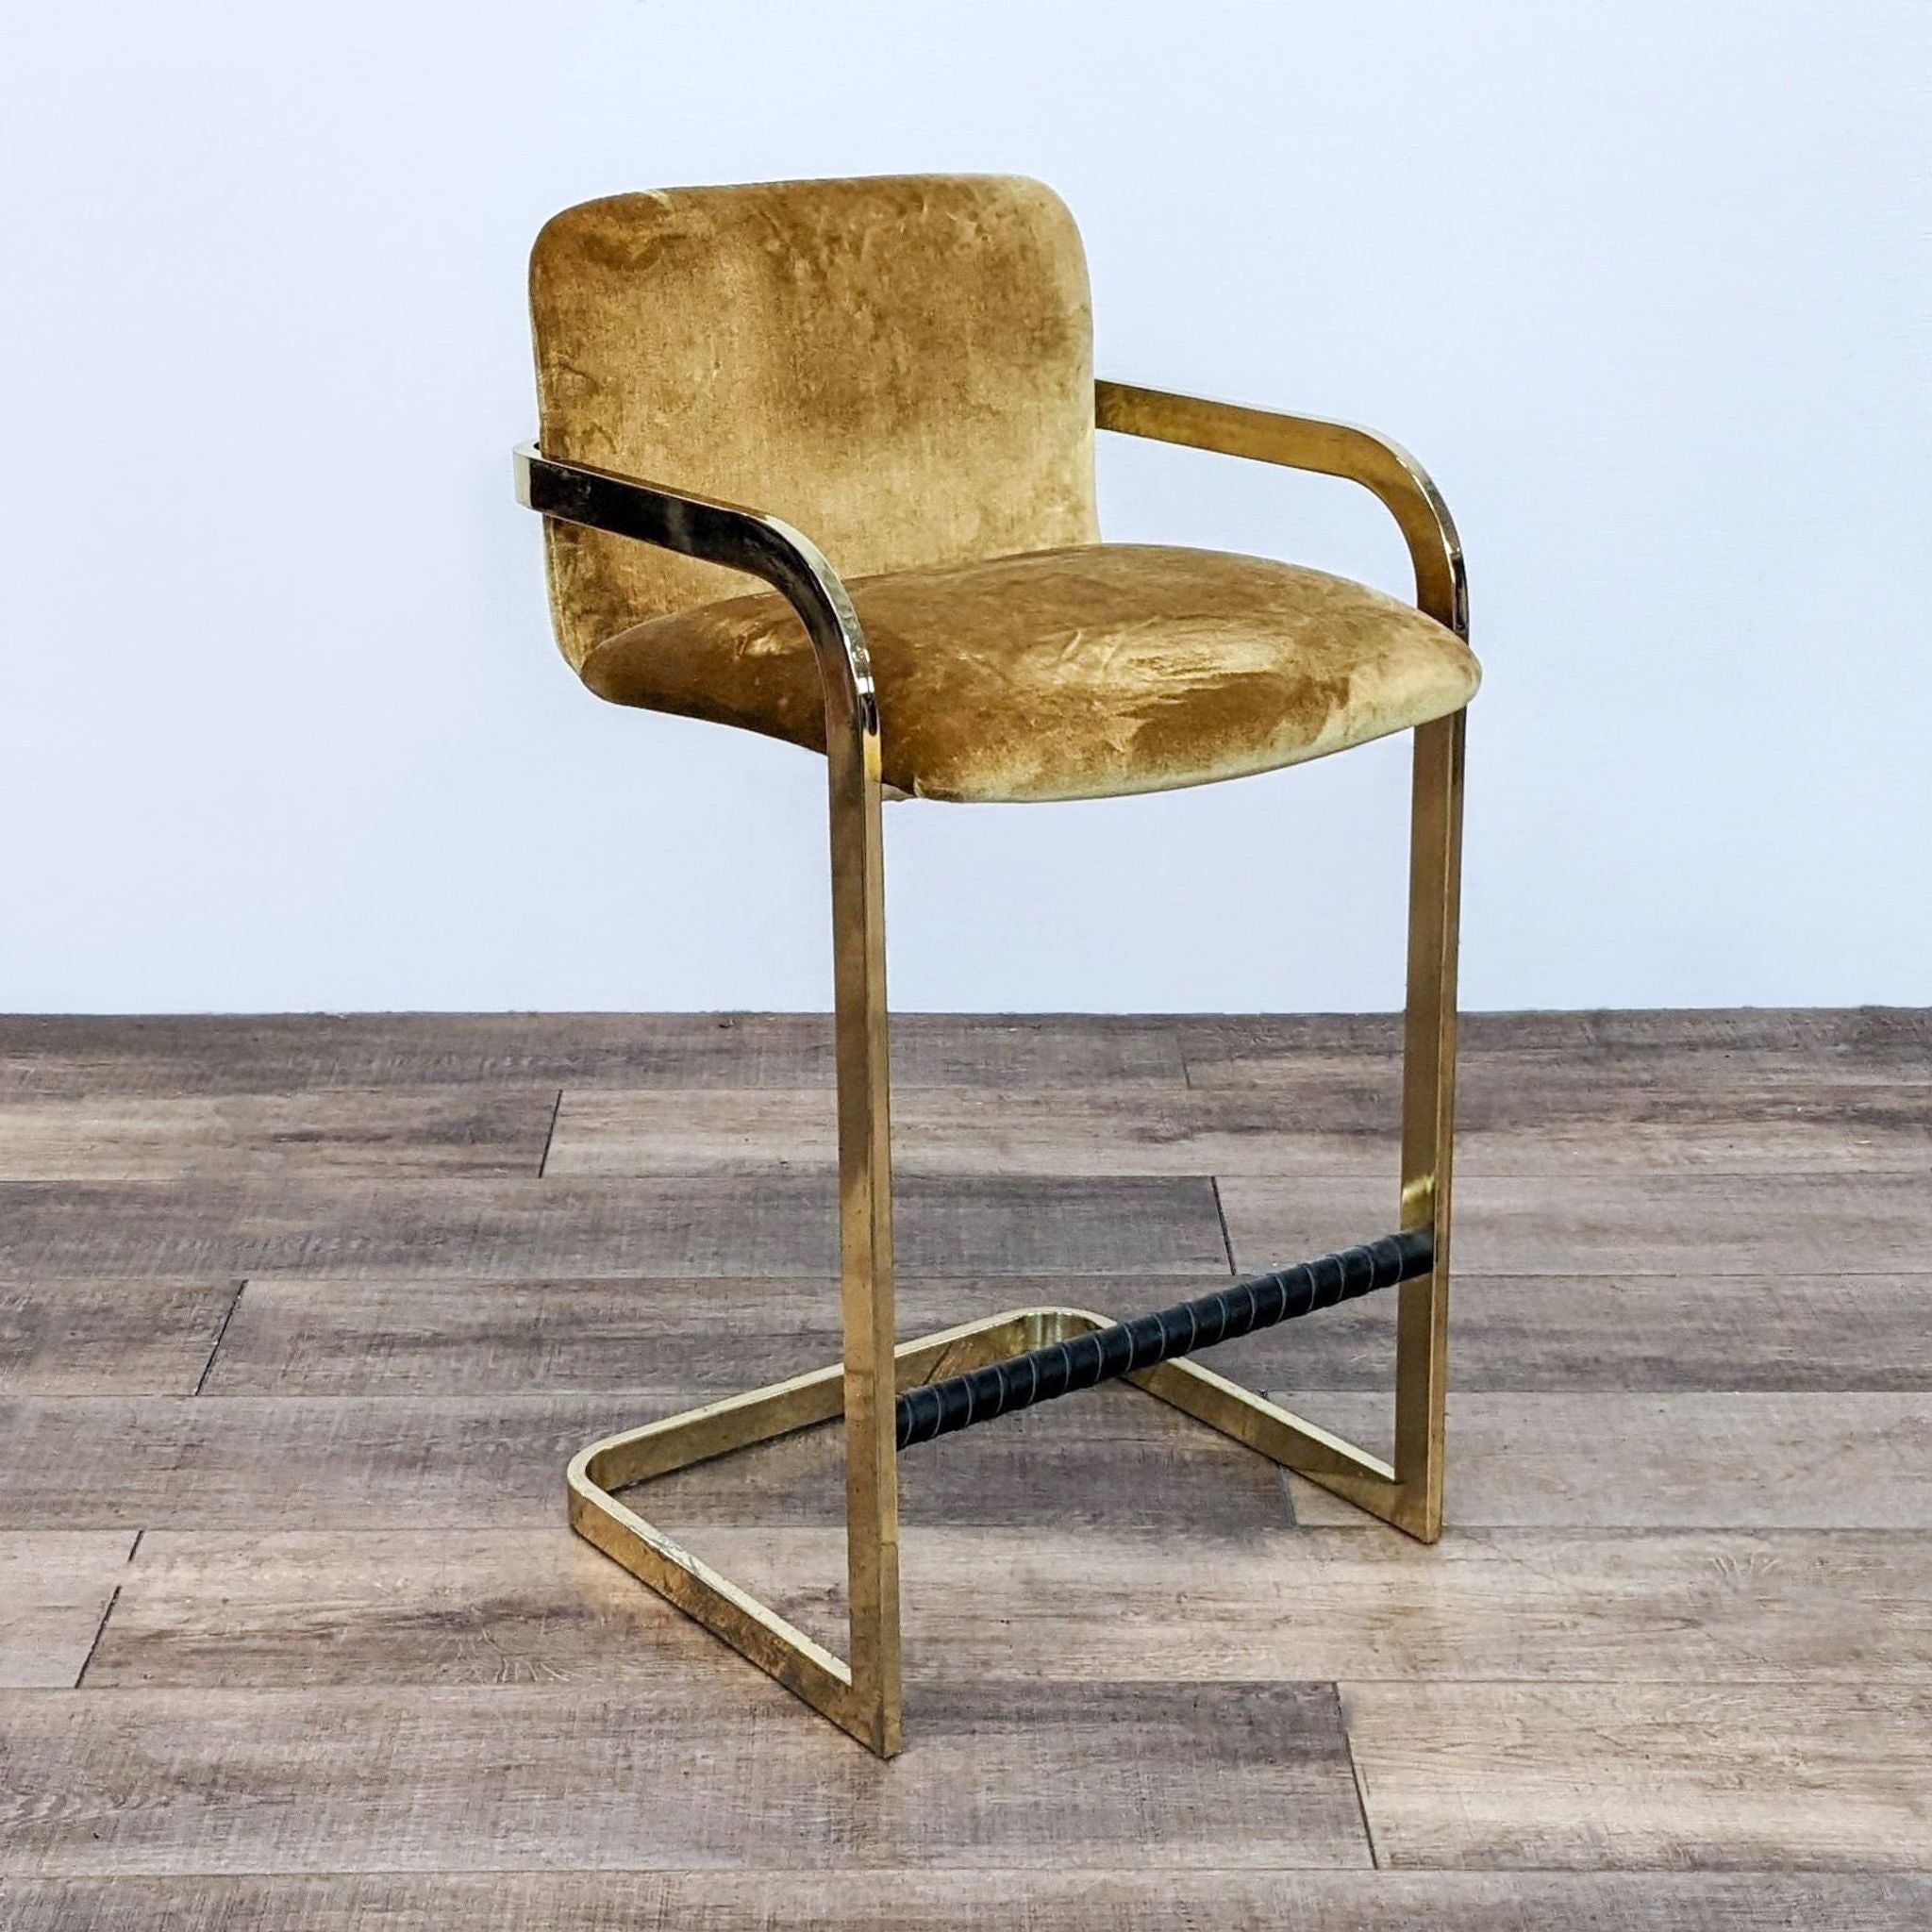 Mid-century designer Milo Baughman stool with padded gold velvet seat and back area, brass arms and frame.